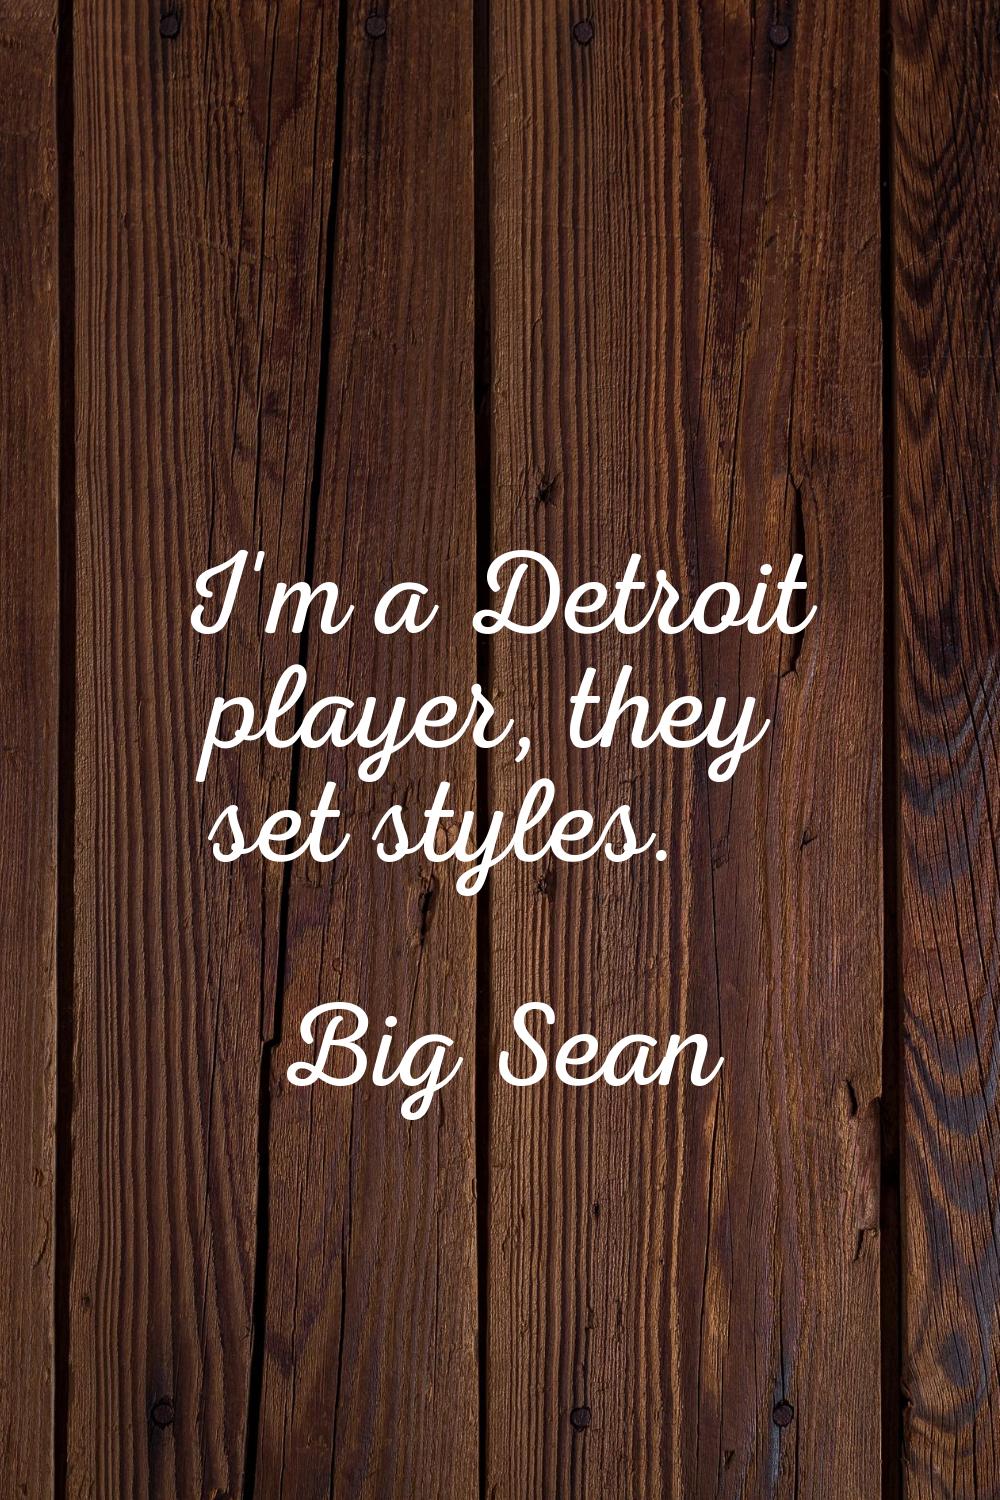 I'm a Detroit player, they set styles.